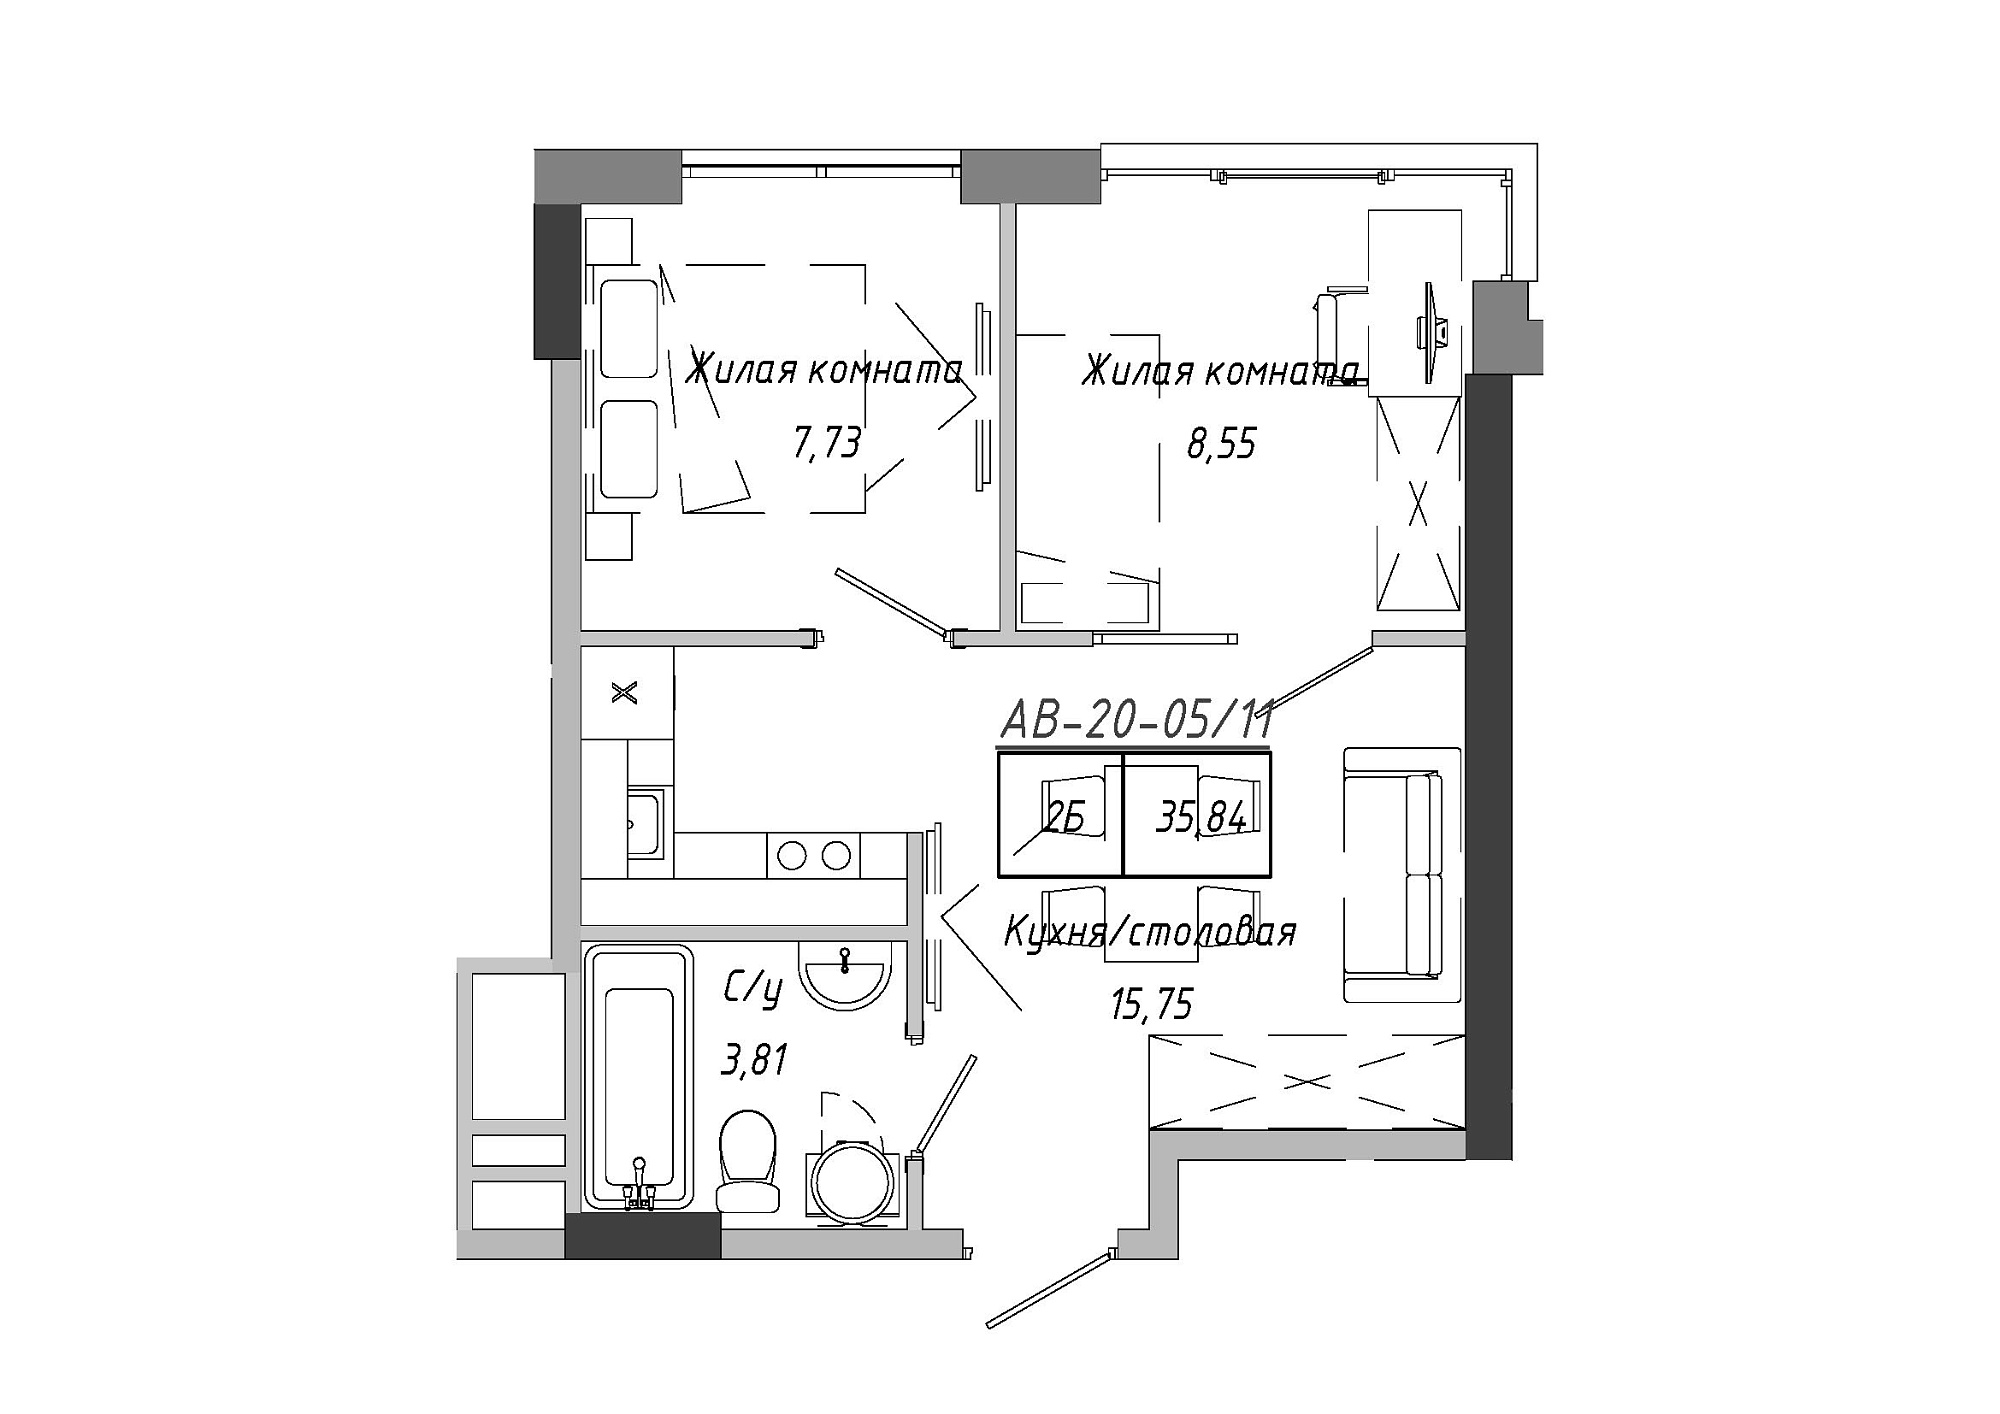 Planning 2-rm flats area 36.12m2, AB-20-05/00011.